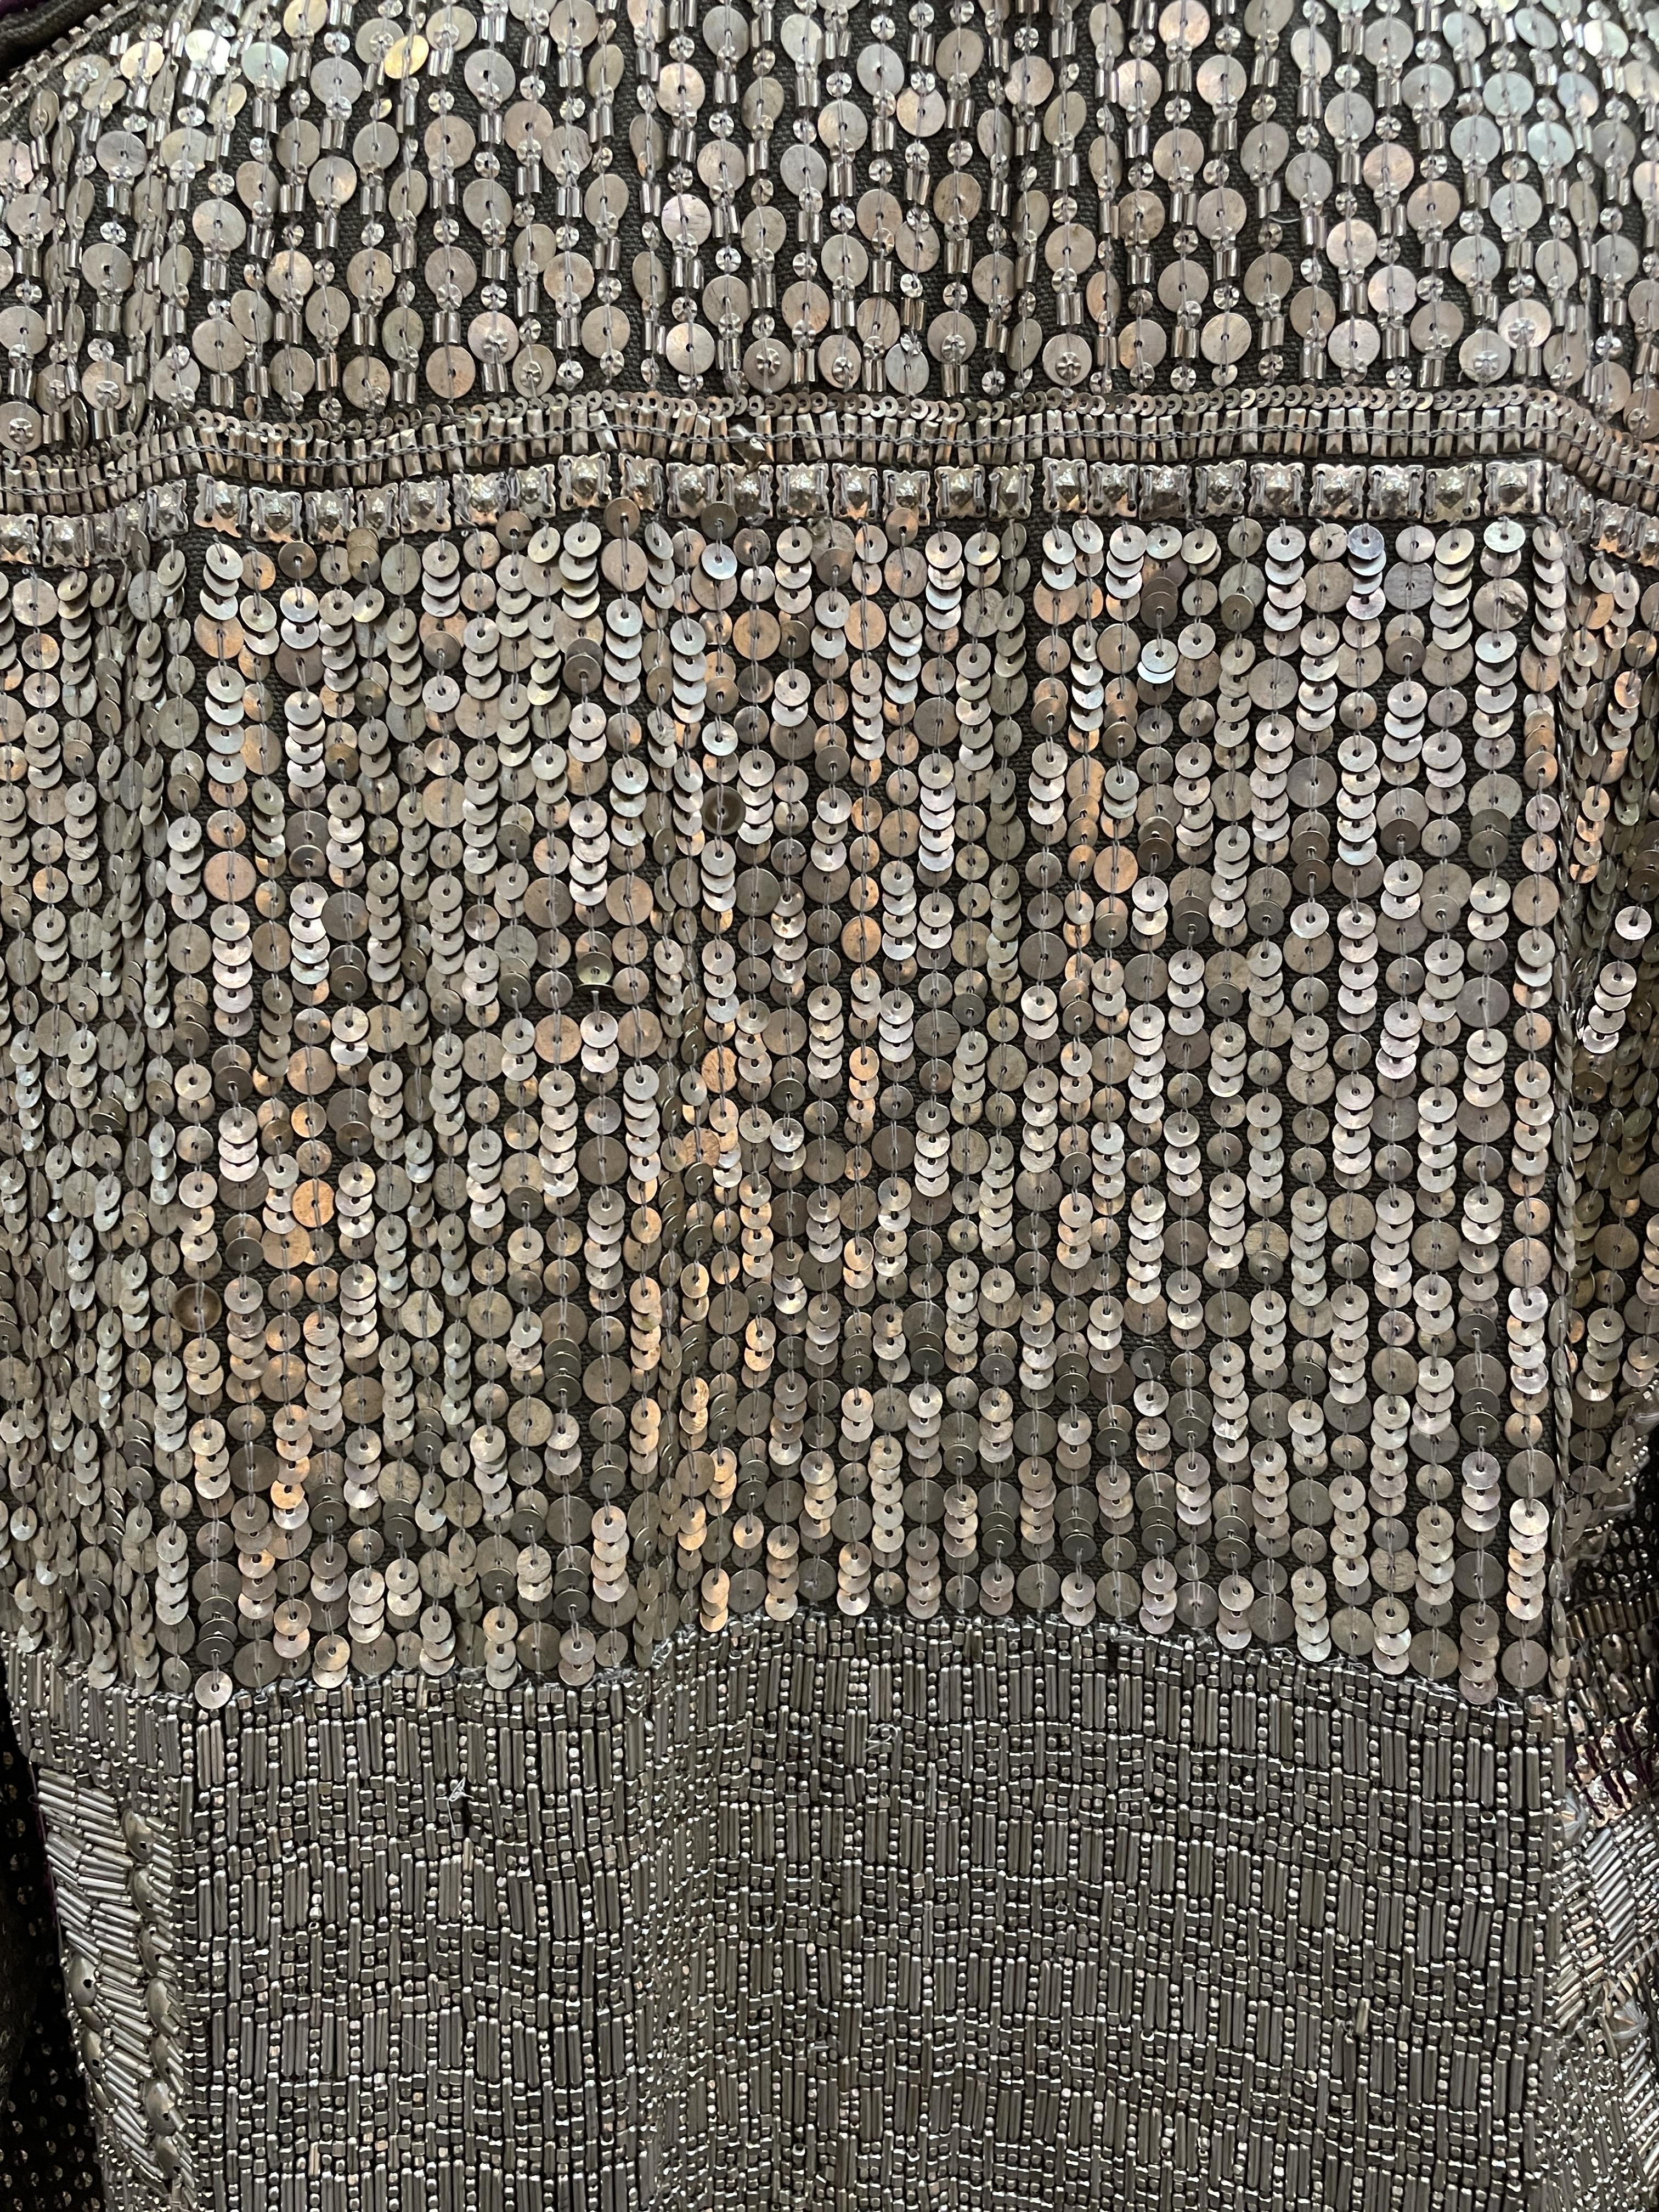 A DRIES VAN NOTEN EMBELLISHED MILITARY JACKET - Image 13 of 13